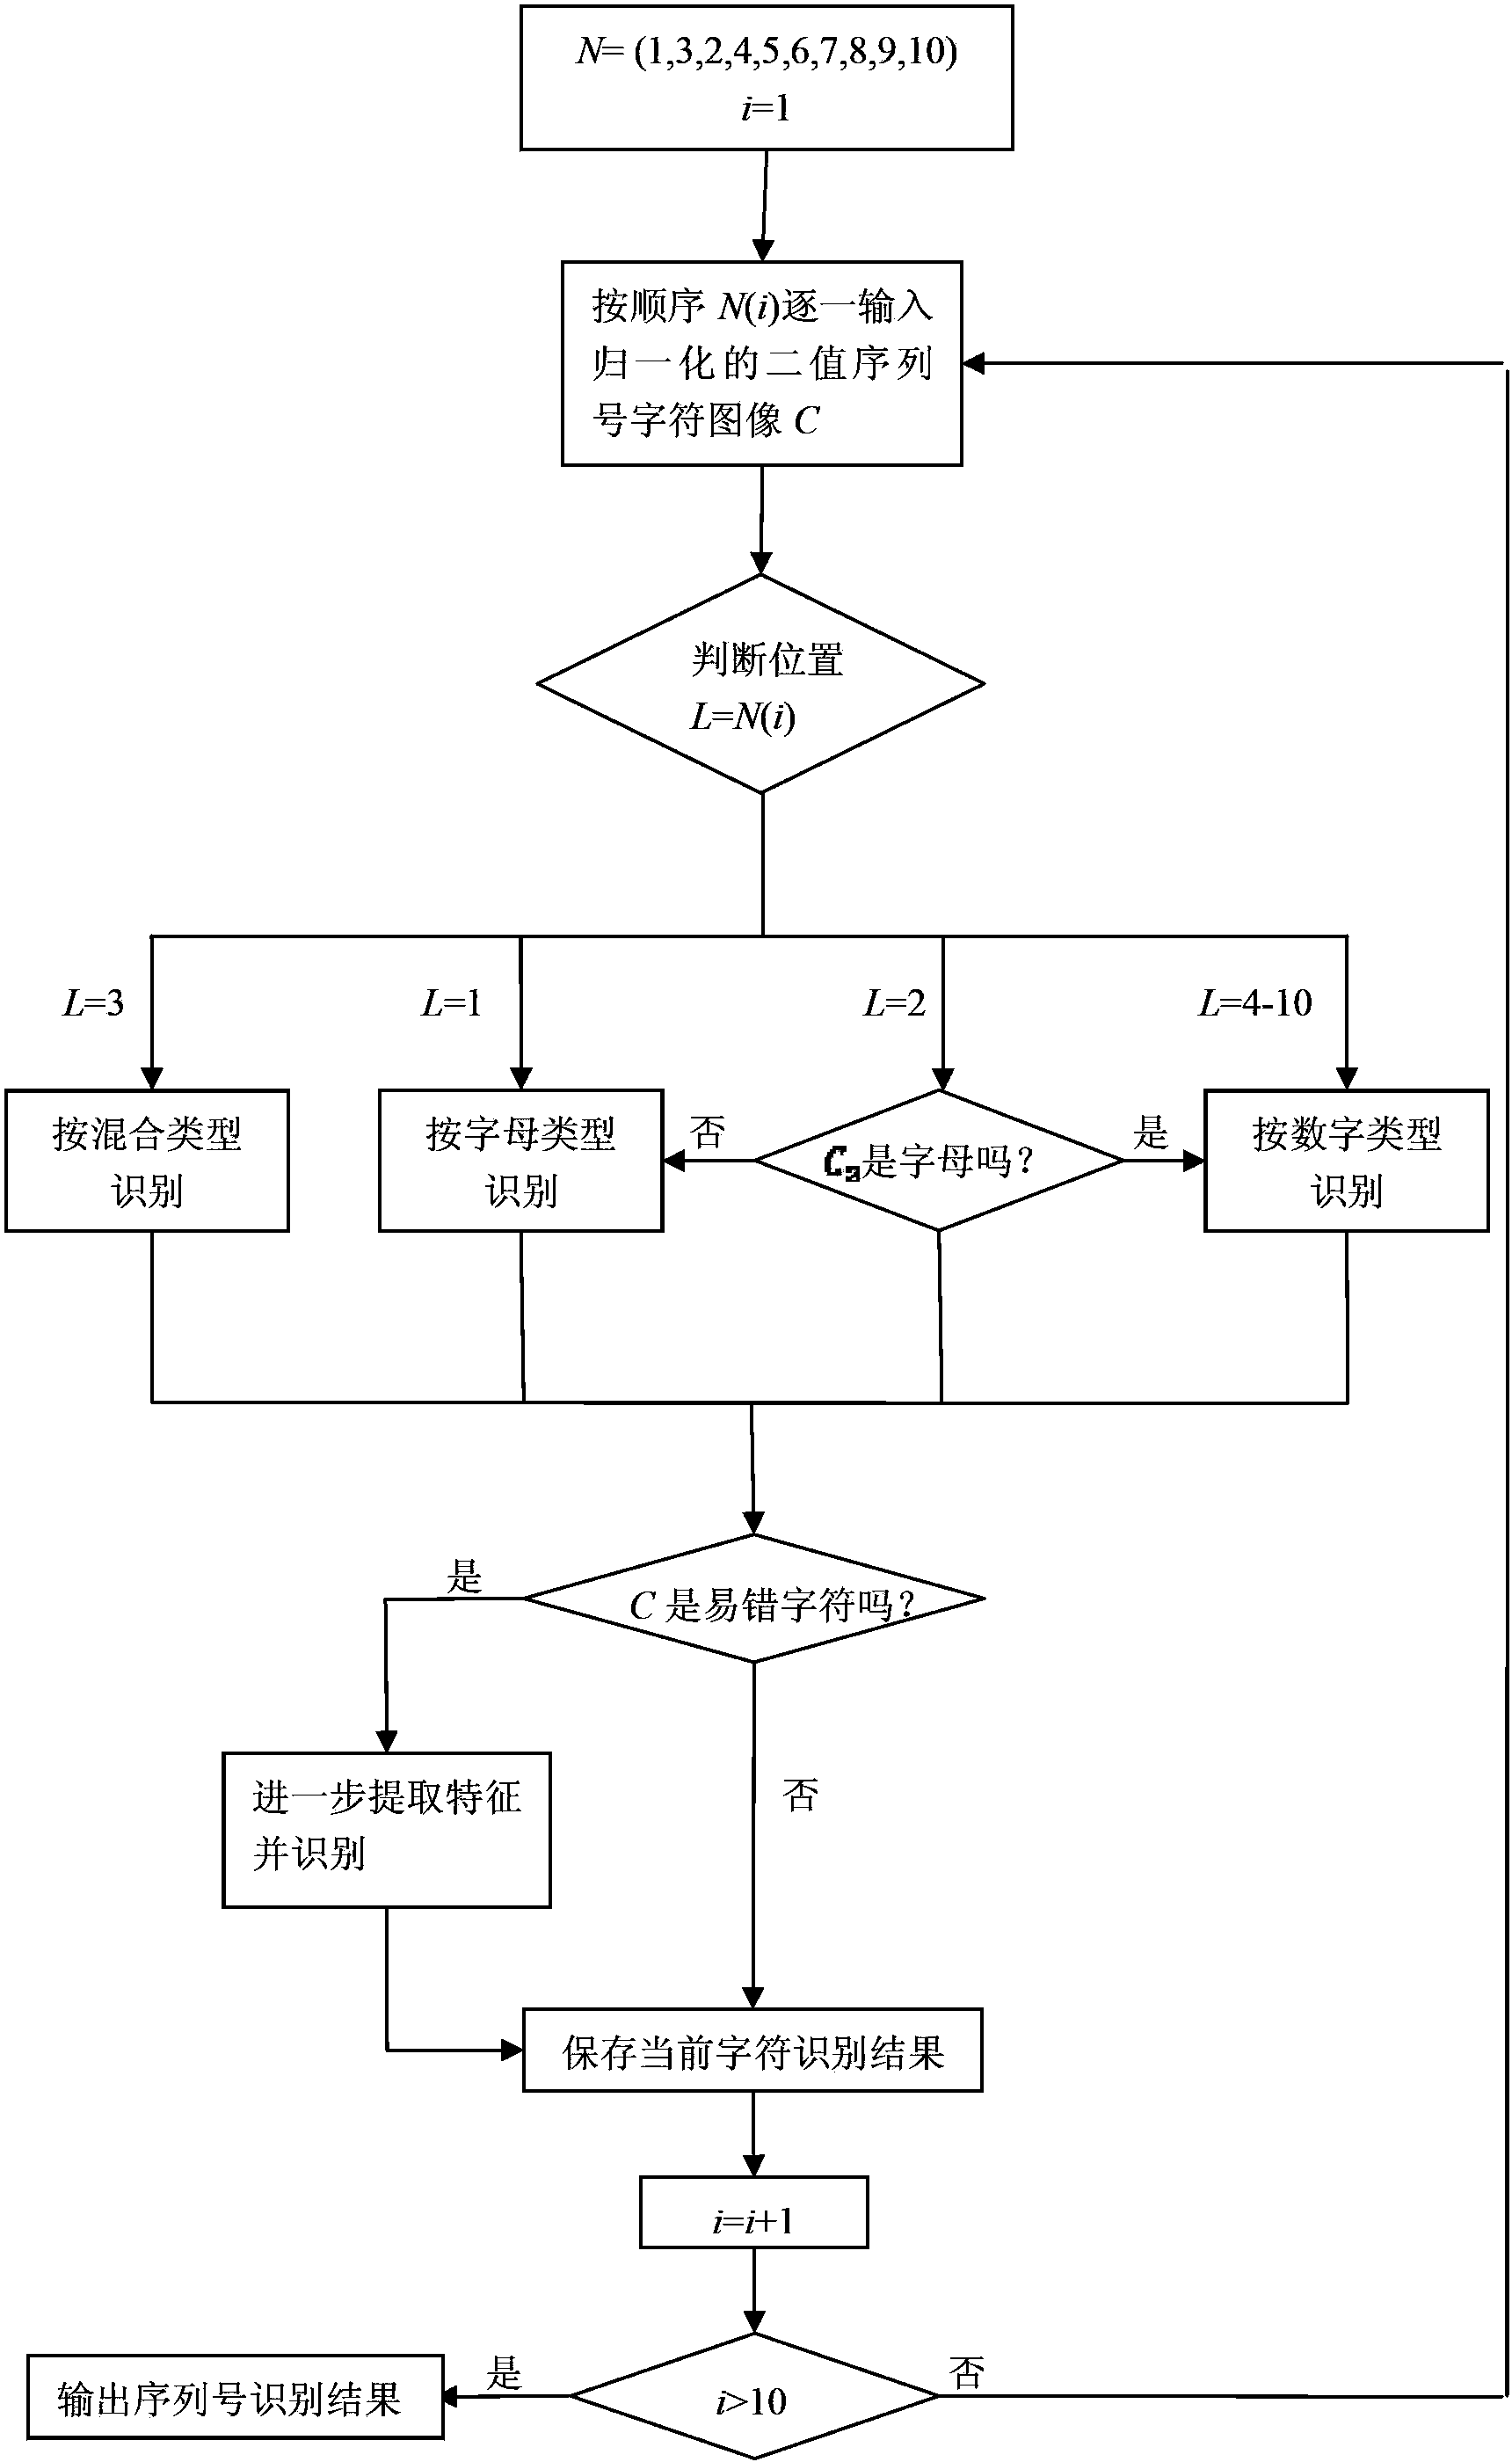 RMB sequence number identification method